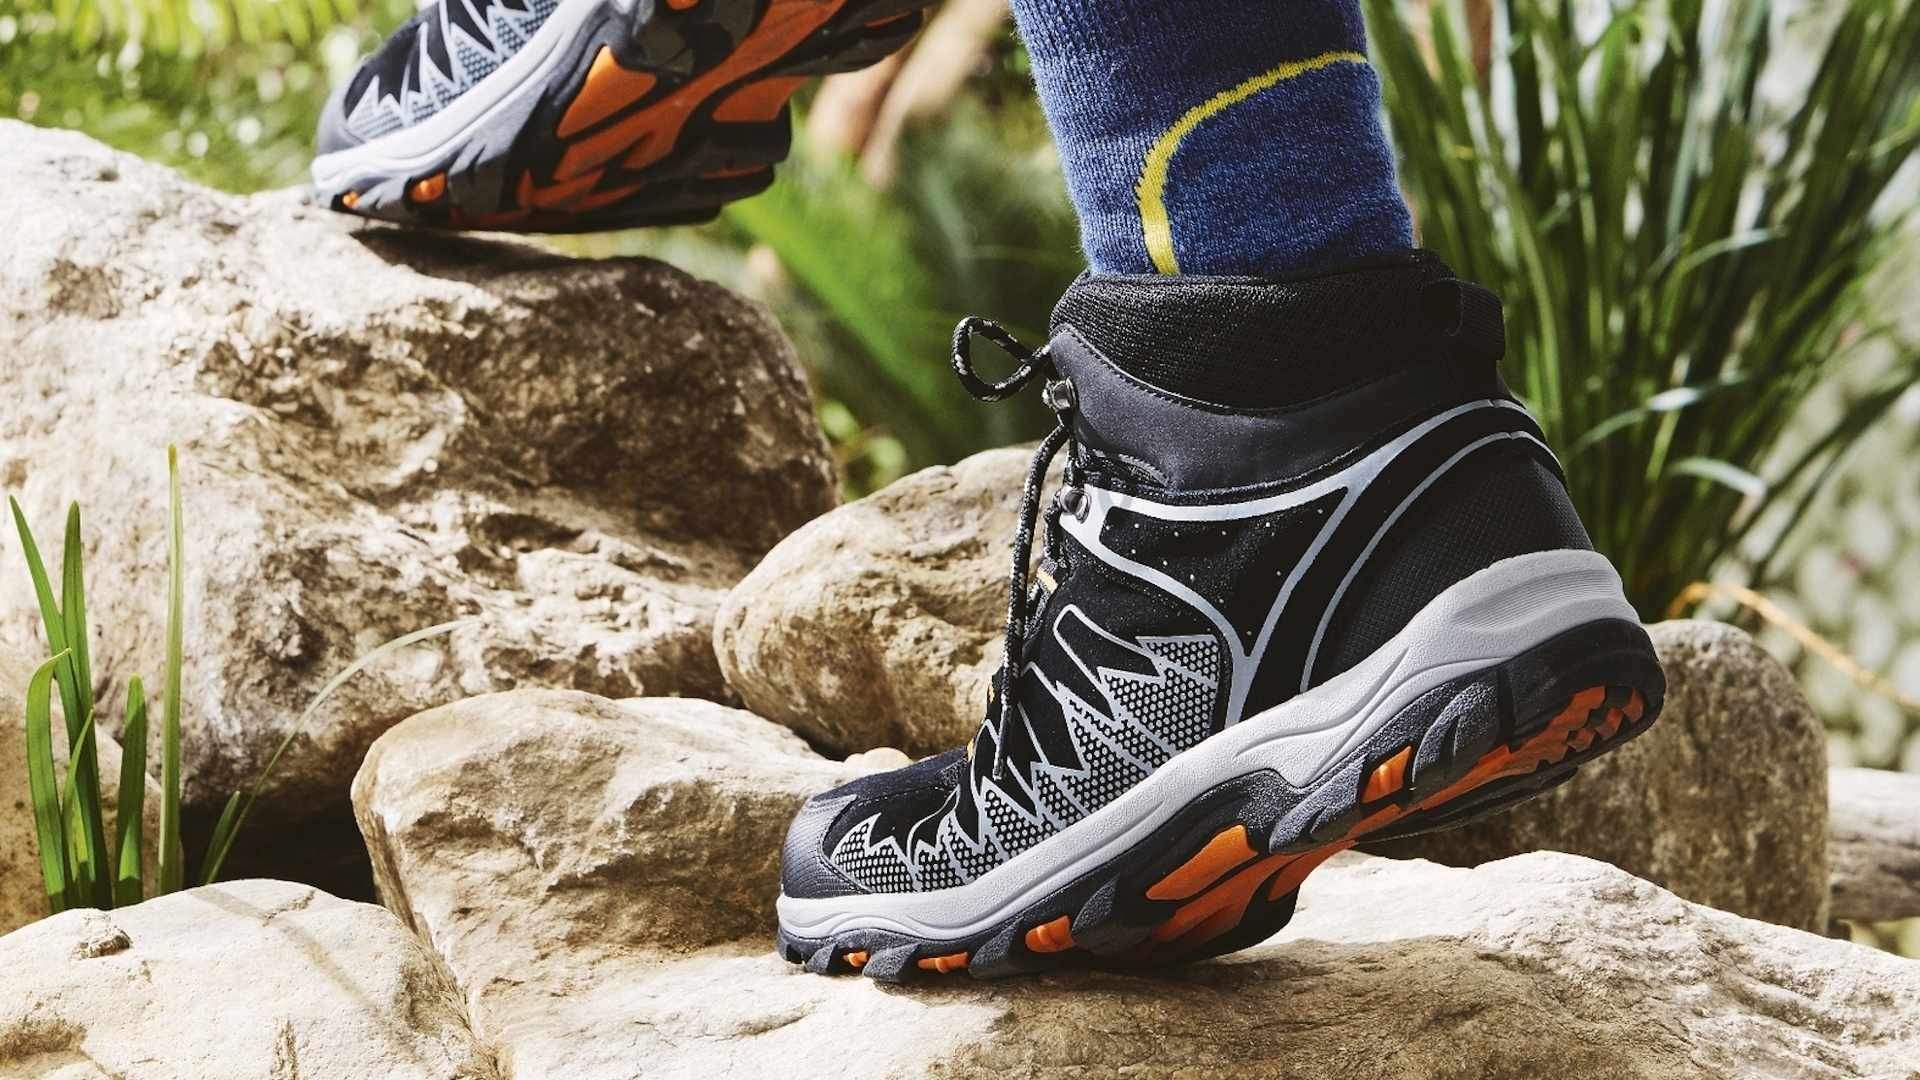 Aldi Is Releasing a Range of Affordable Hiking Gear So You Can Start ...